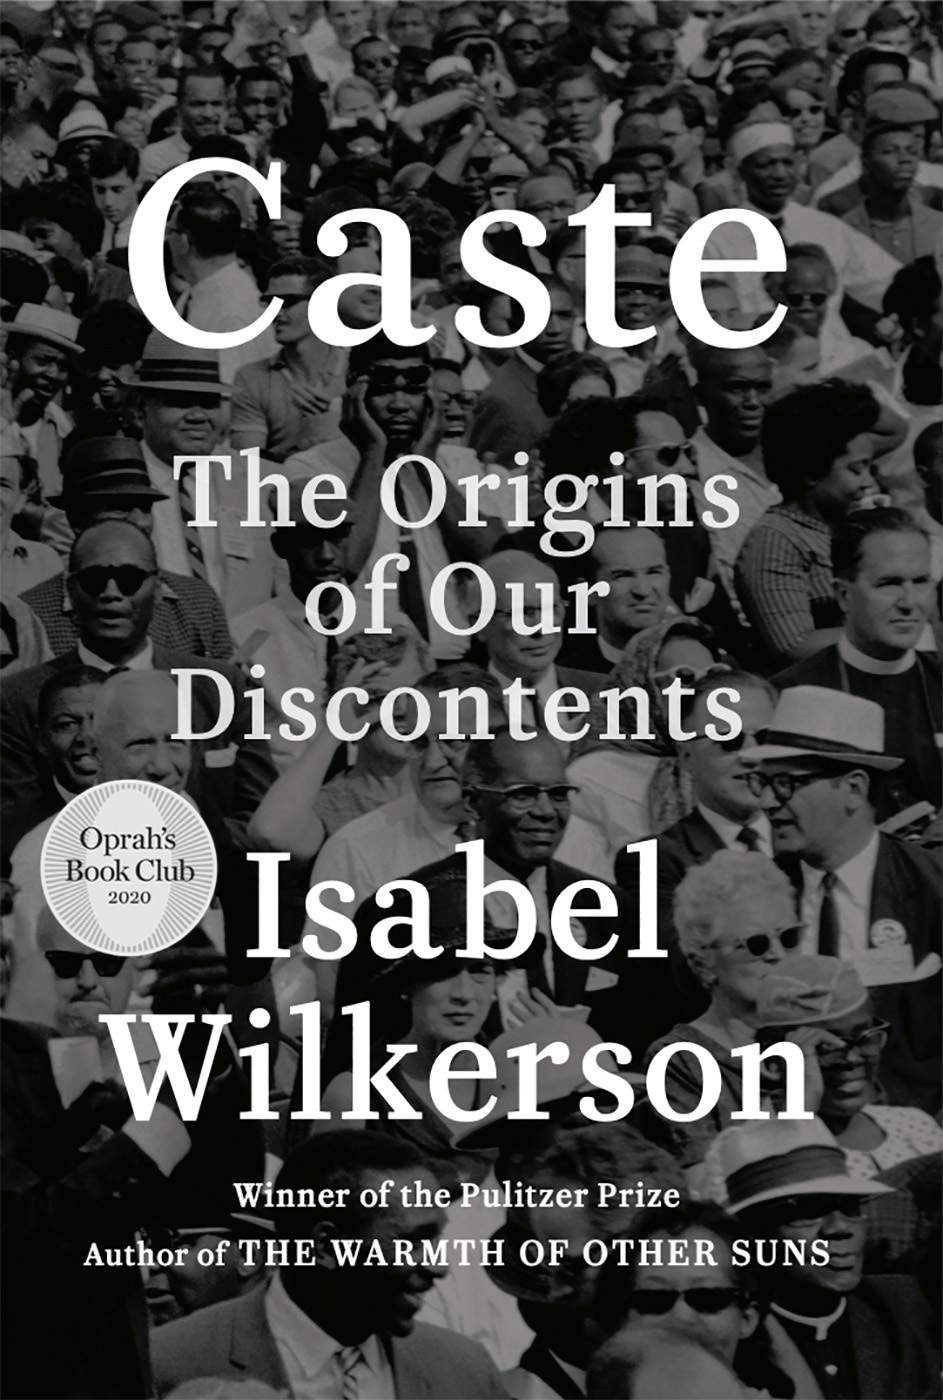 Wilkerson's 'Caste' among finalists for Lukas book prize